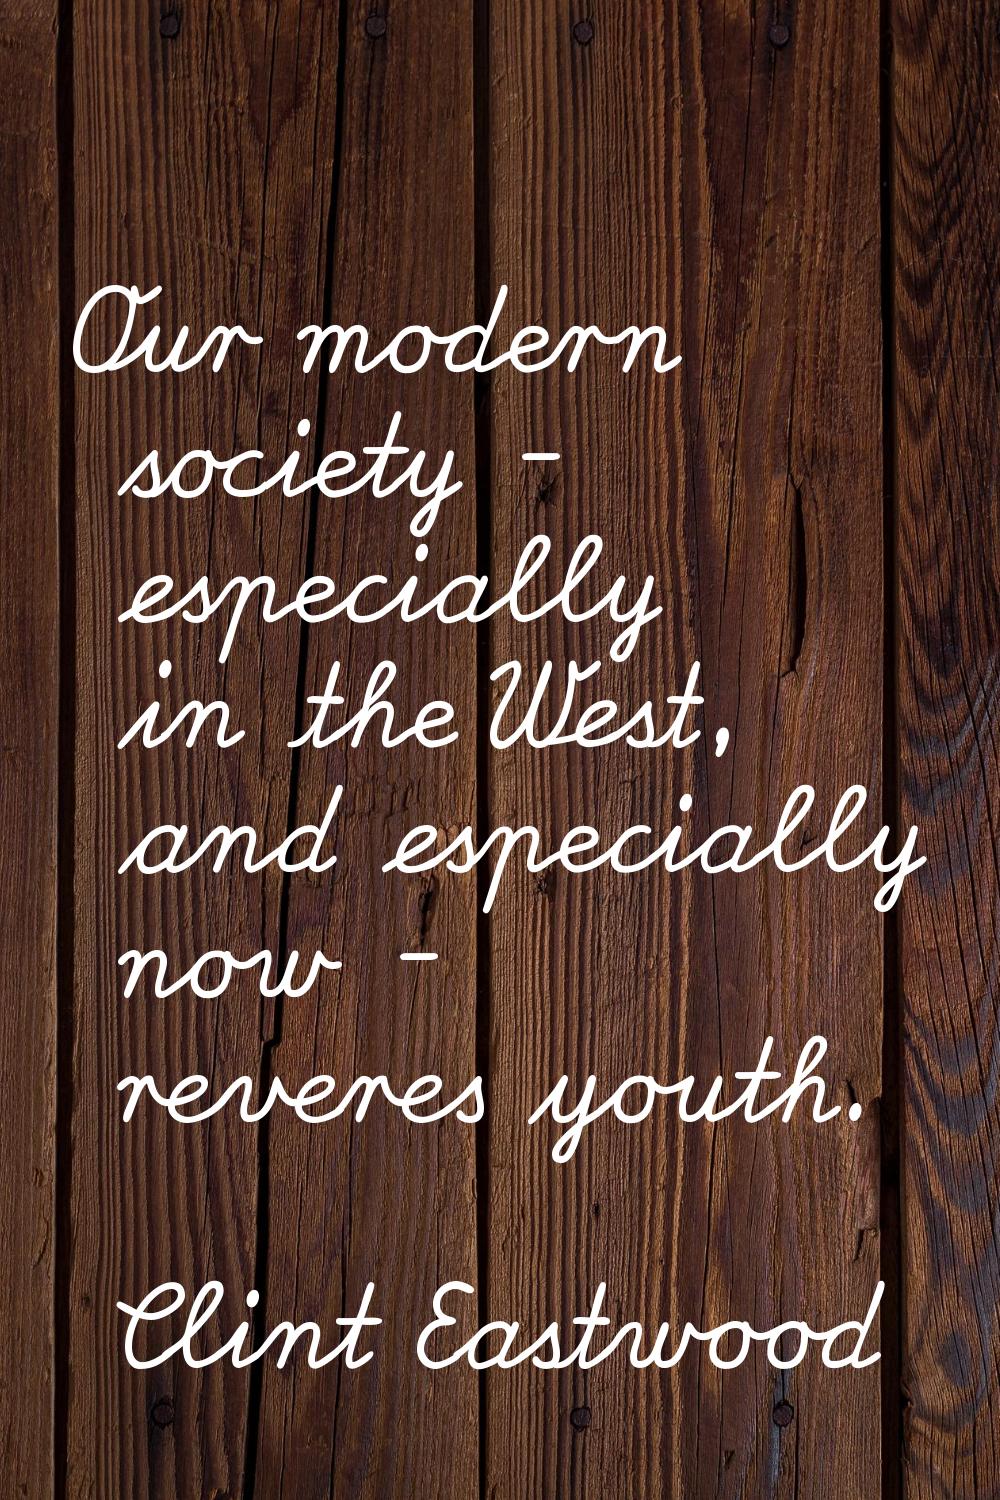 Our modern society - especially in the West, and especially now - reveres youth.